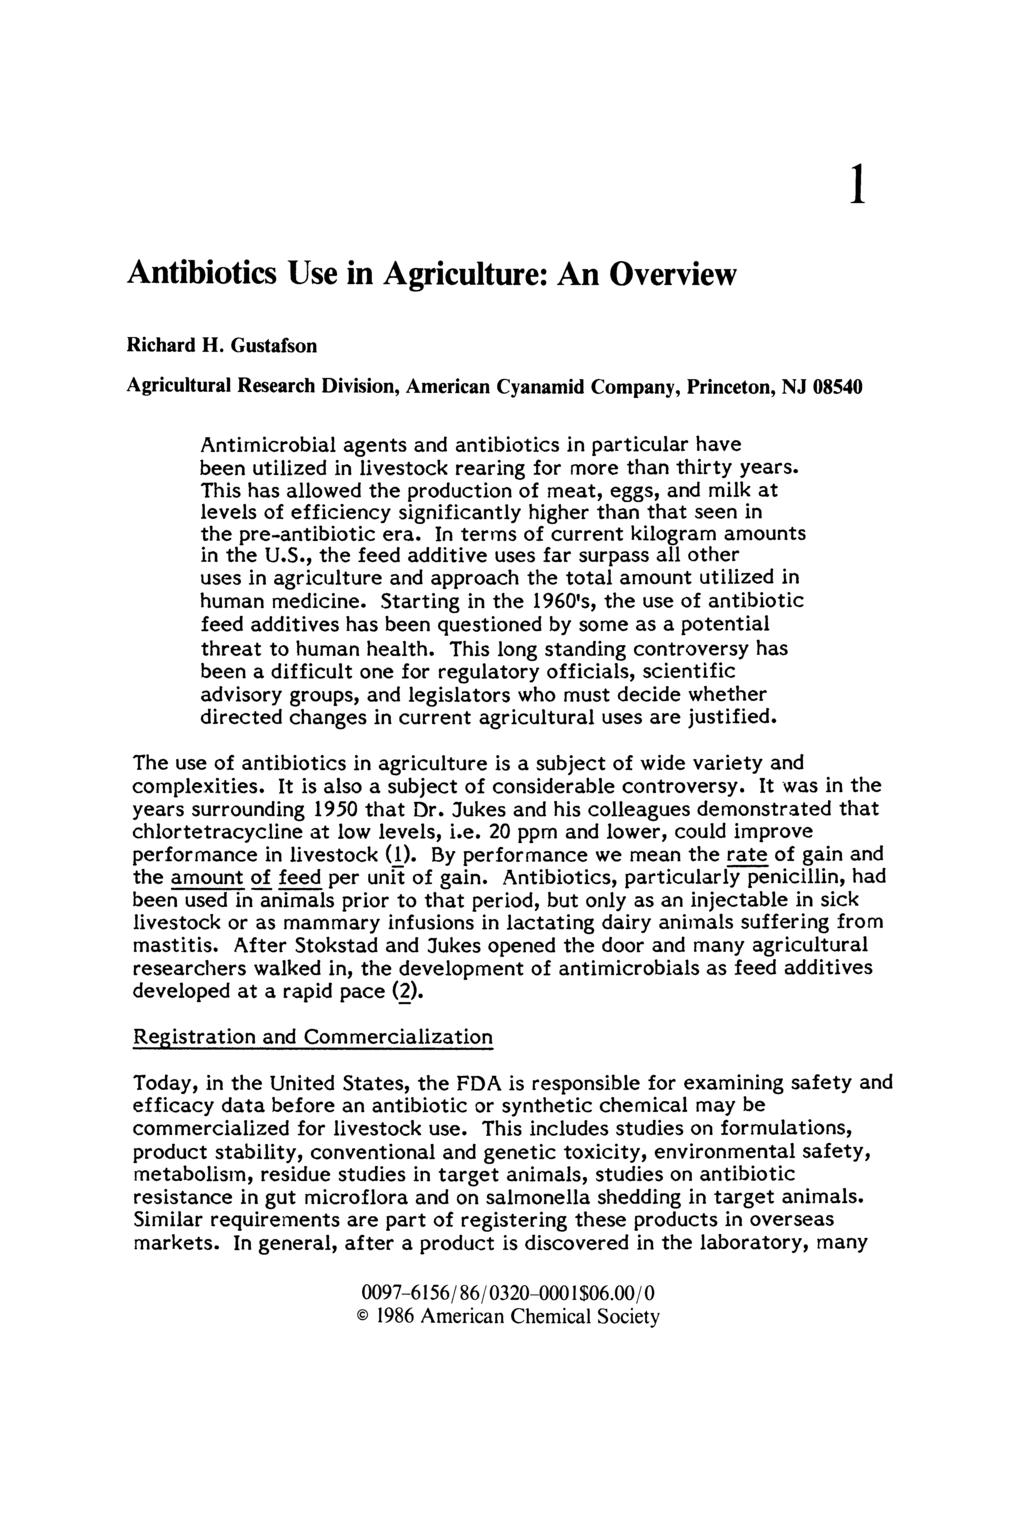 1 Antibiotics Use in Agriculture: An Overview Richard H. Gustafson Downloaded via 148.251.232.83 on October 16, 2018 at 00:12:00 (UTC). See https://pubs.acs.